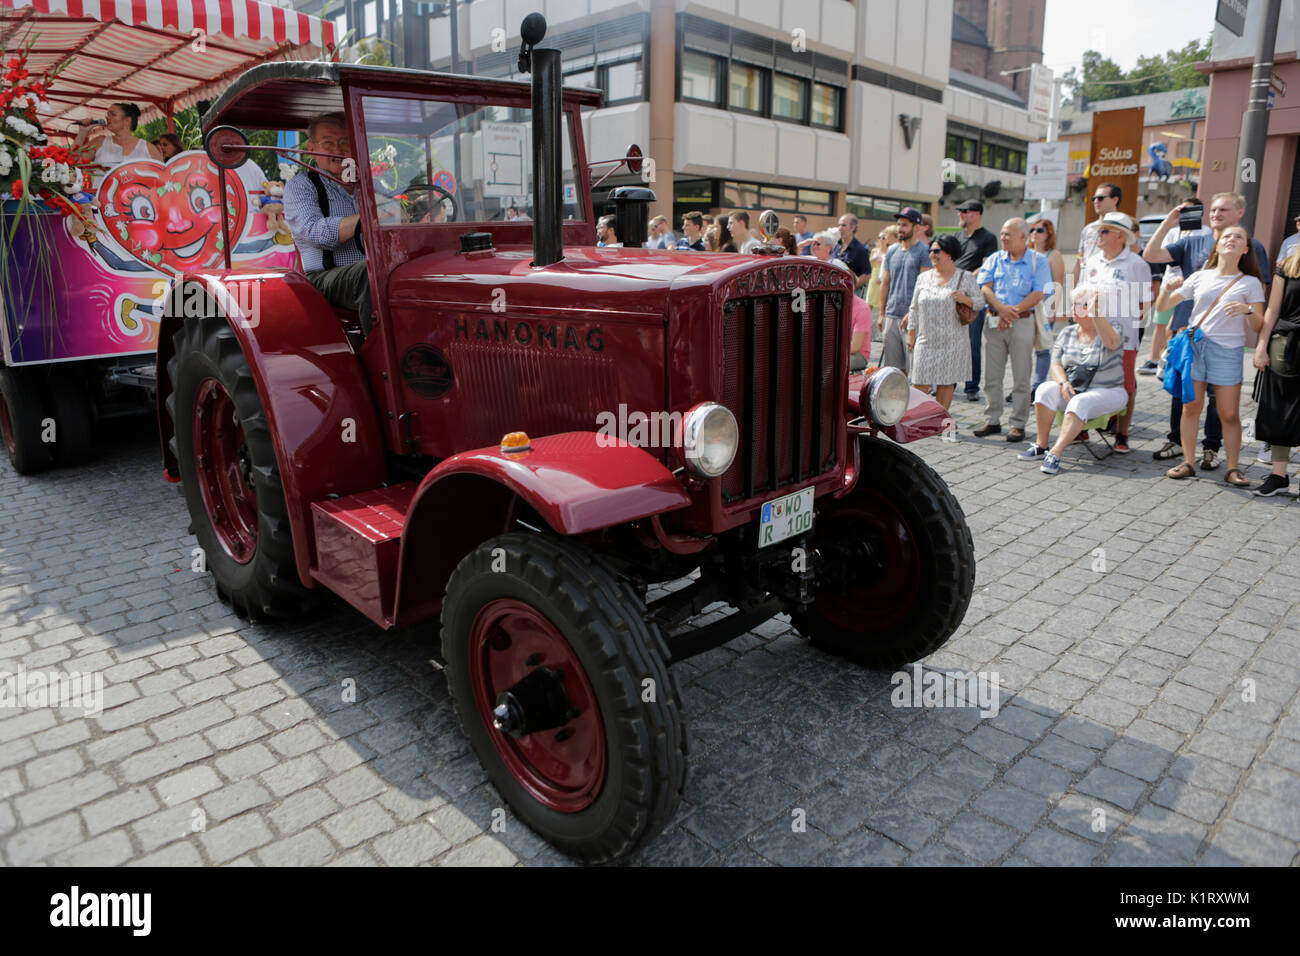 Worms, Germany. 27th August 2017. An old Hanomag tractor pulls a float in the parade. The first highlight of the 2017 Backfischfest was the big parade through the city of Worms with over 80 groups and floats. Community groups, music groups and business from Worms and further afield took part. Credit: Michael Debets/Alamy Live News Stock Photo